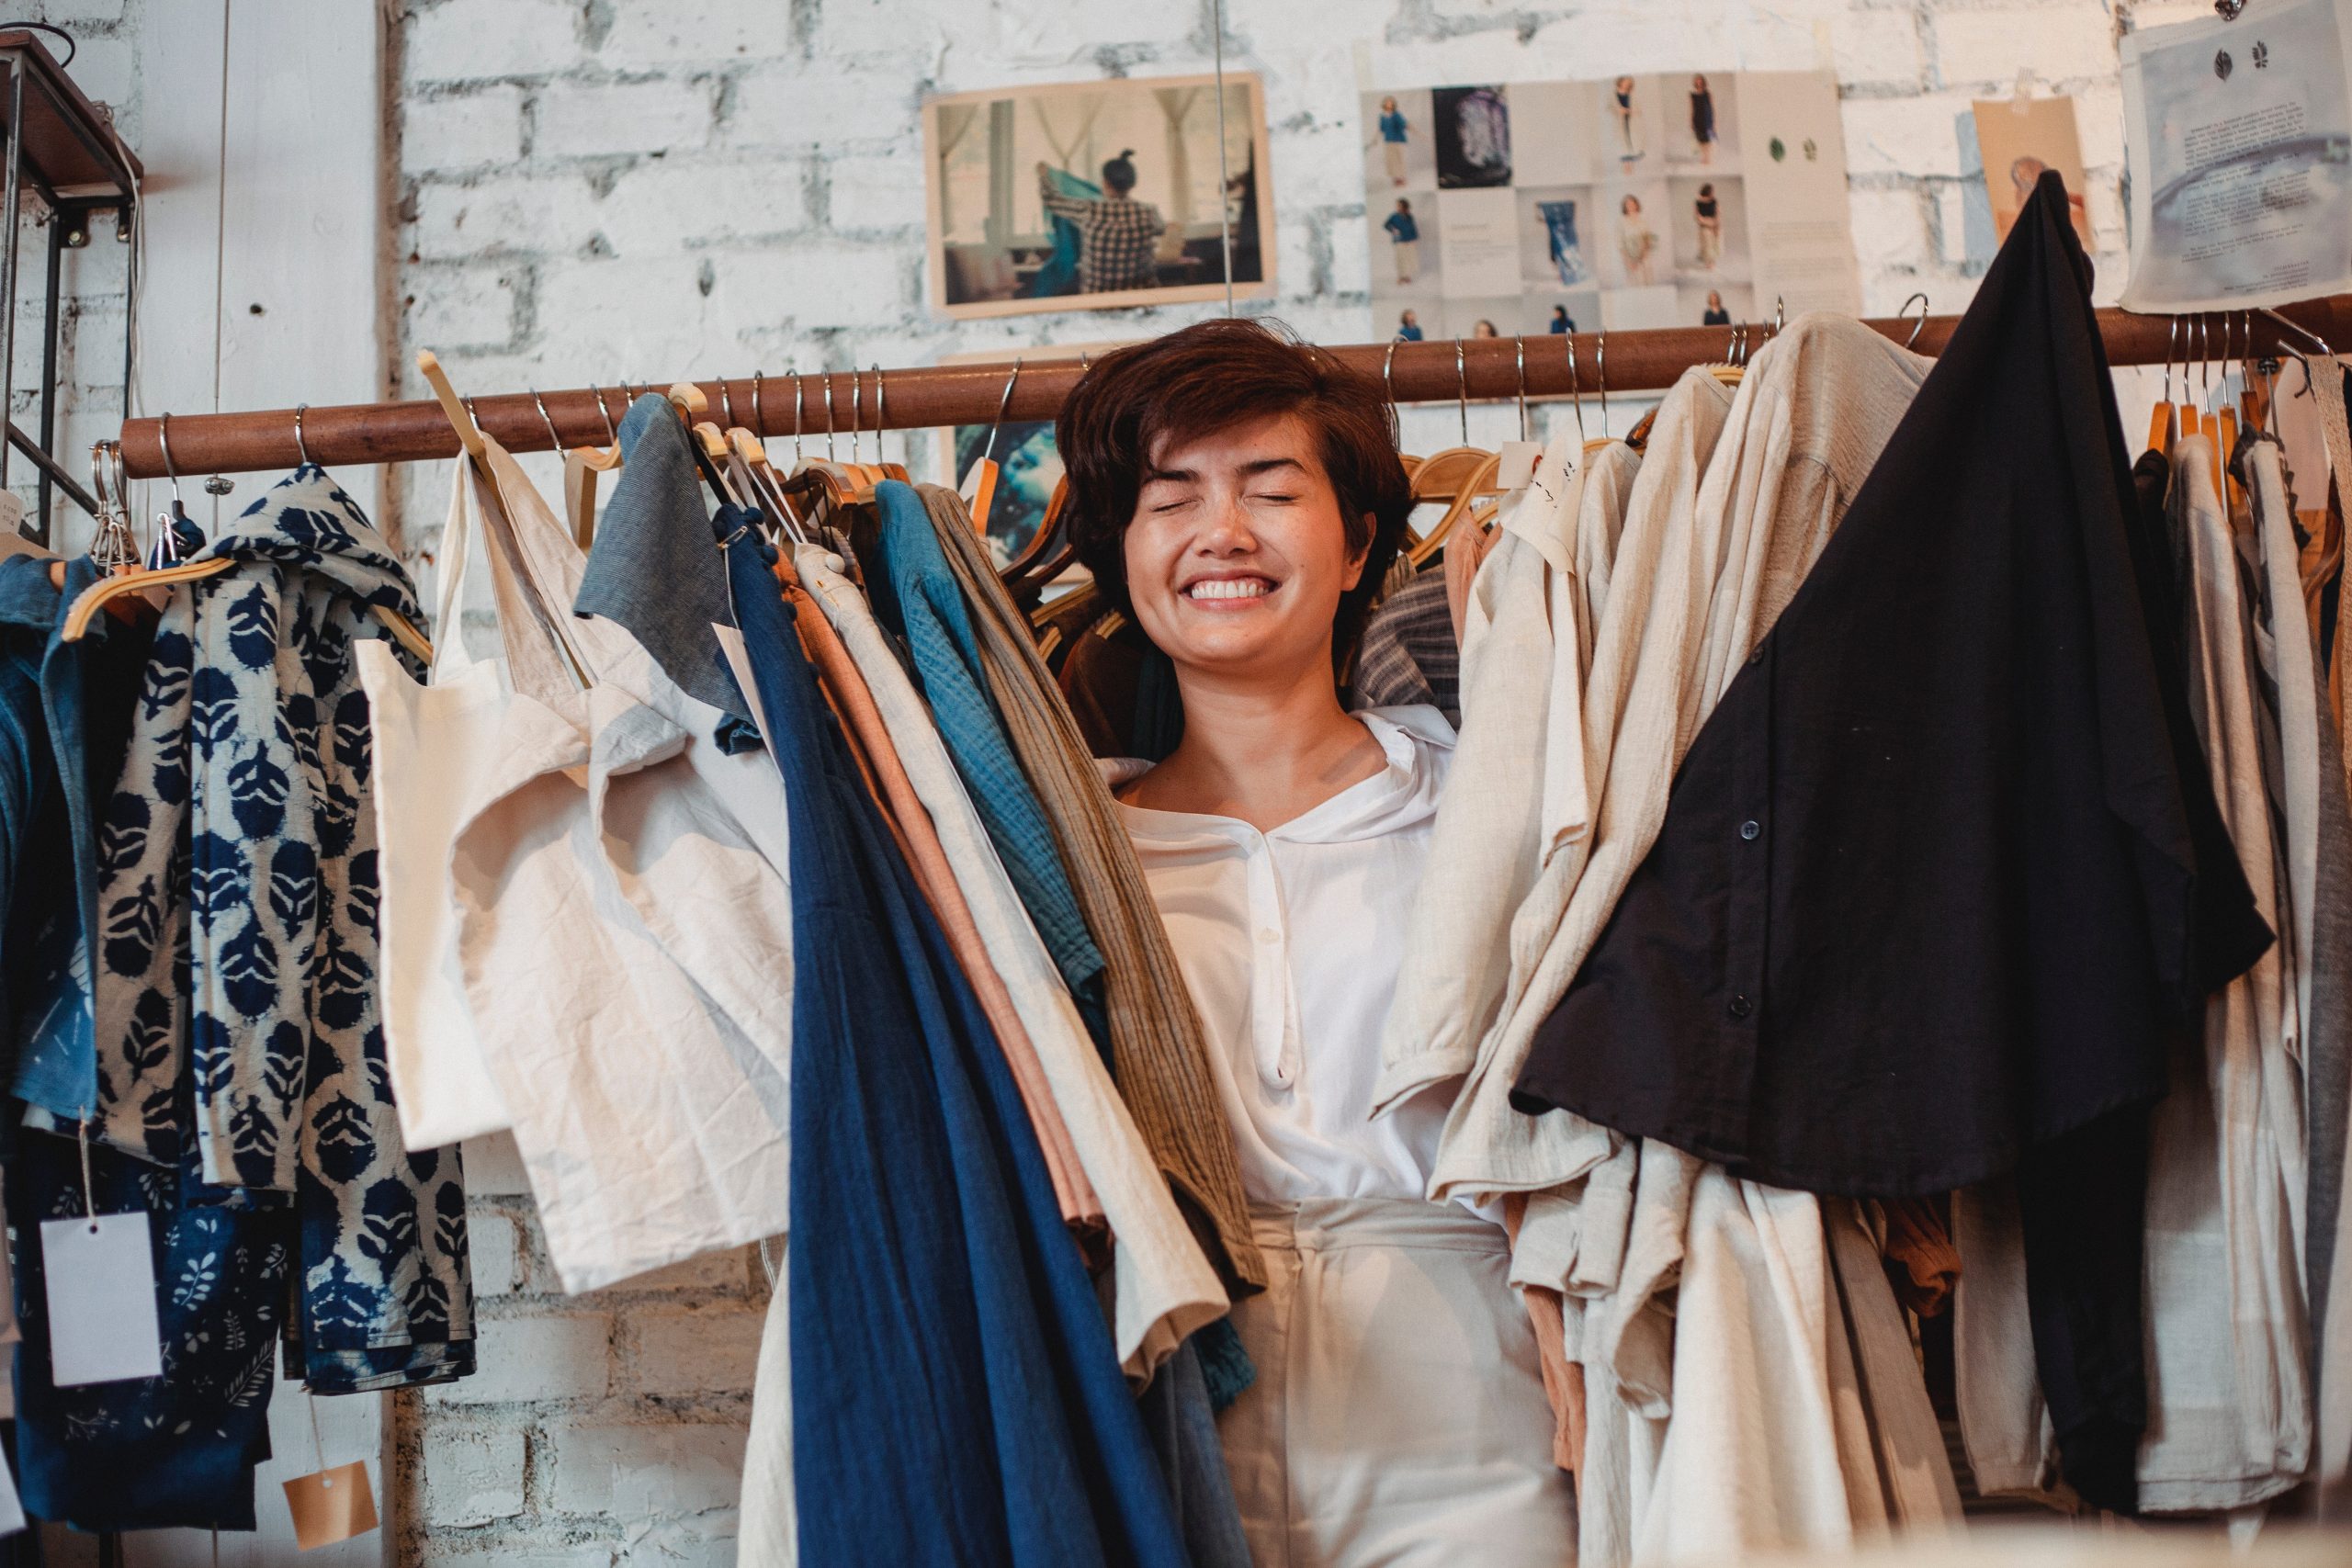 7 Alternative Careers for Retail Managers - Pursue The Passion